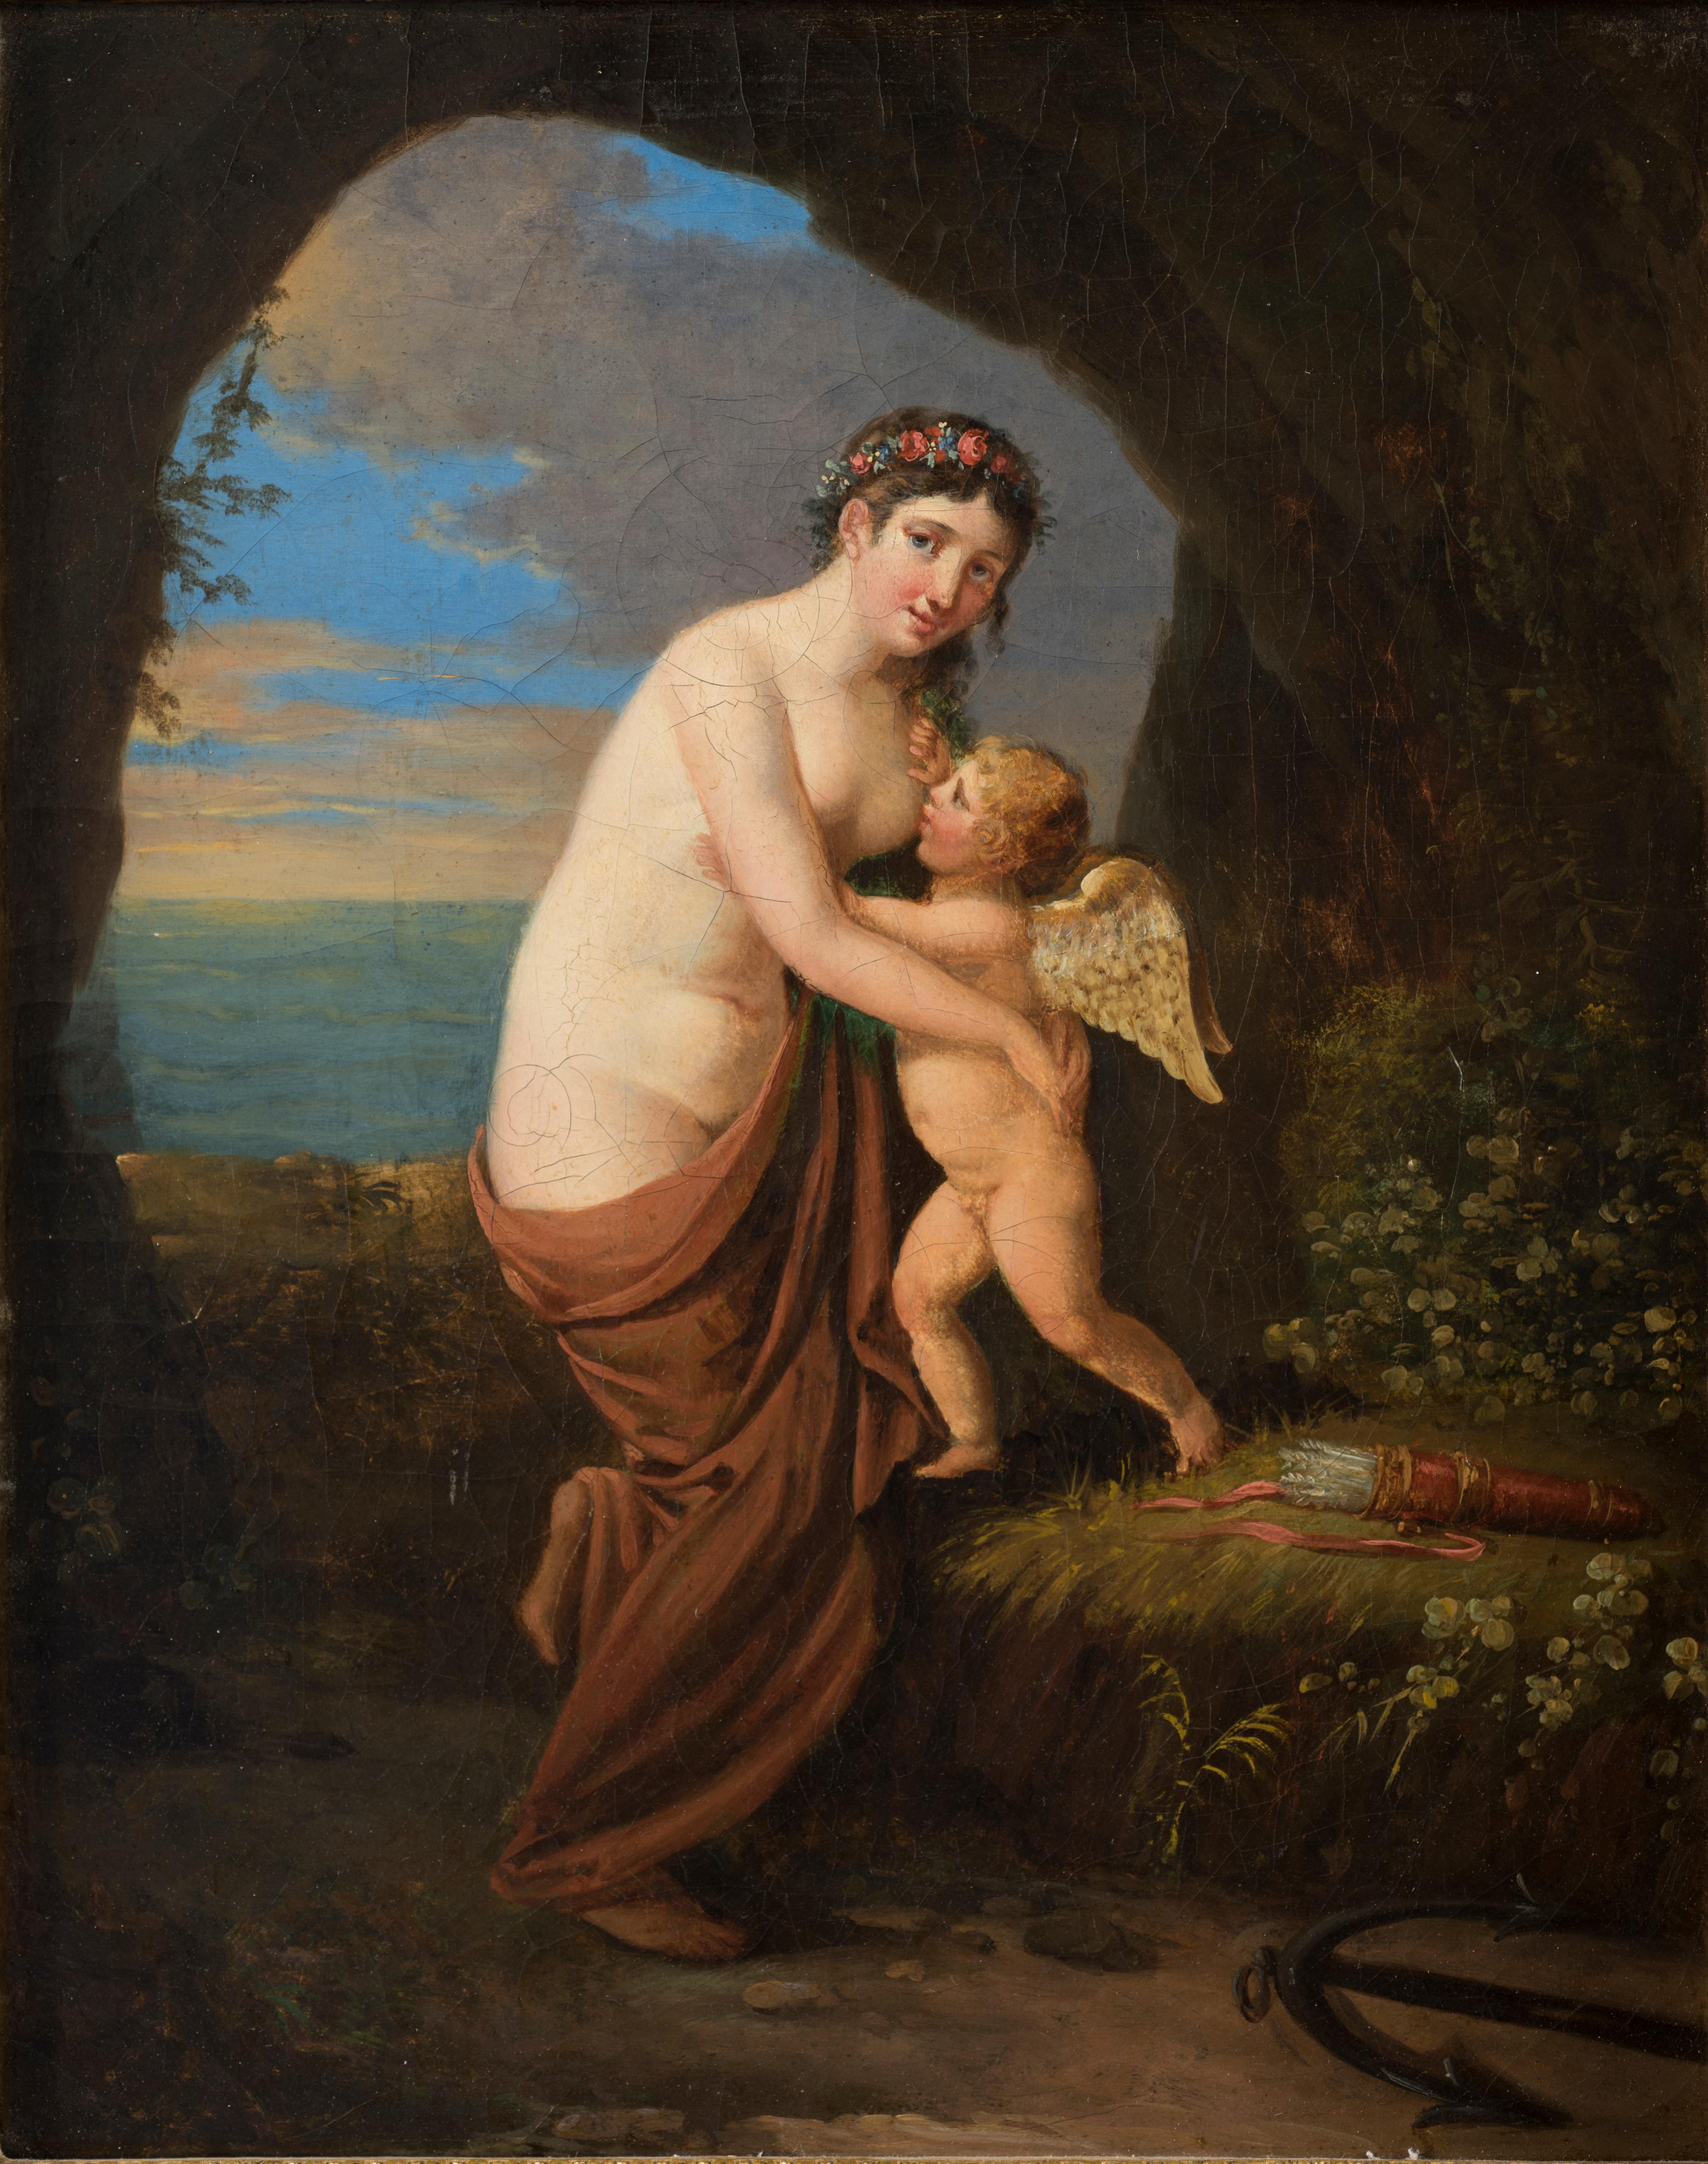 Unknown Figurative Painting - Allegorical Scene, Aphrodite and Eros - Oil on Canvas - Late 18th / Early 19th 